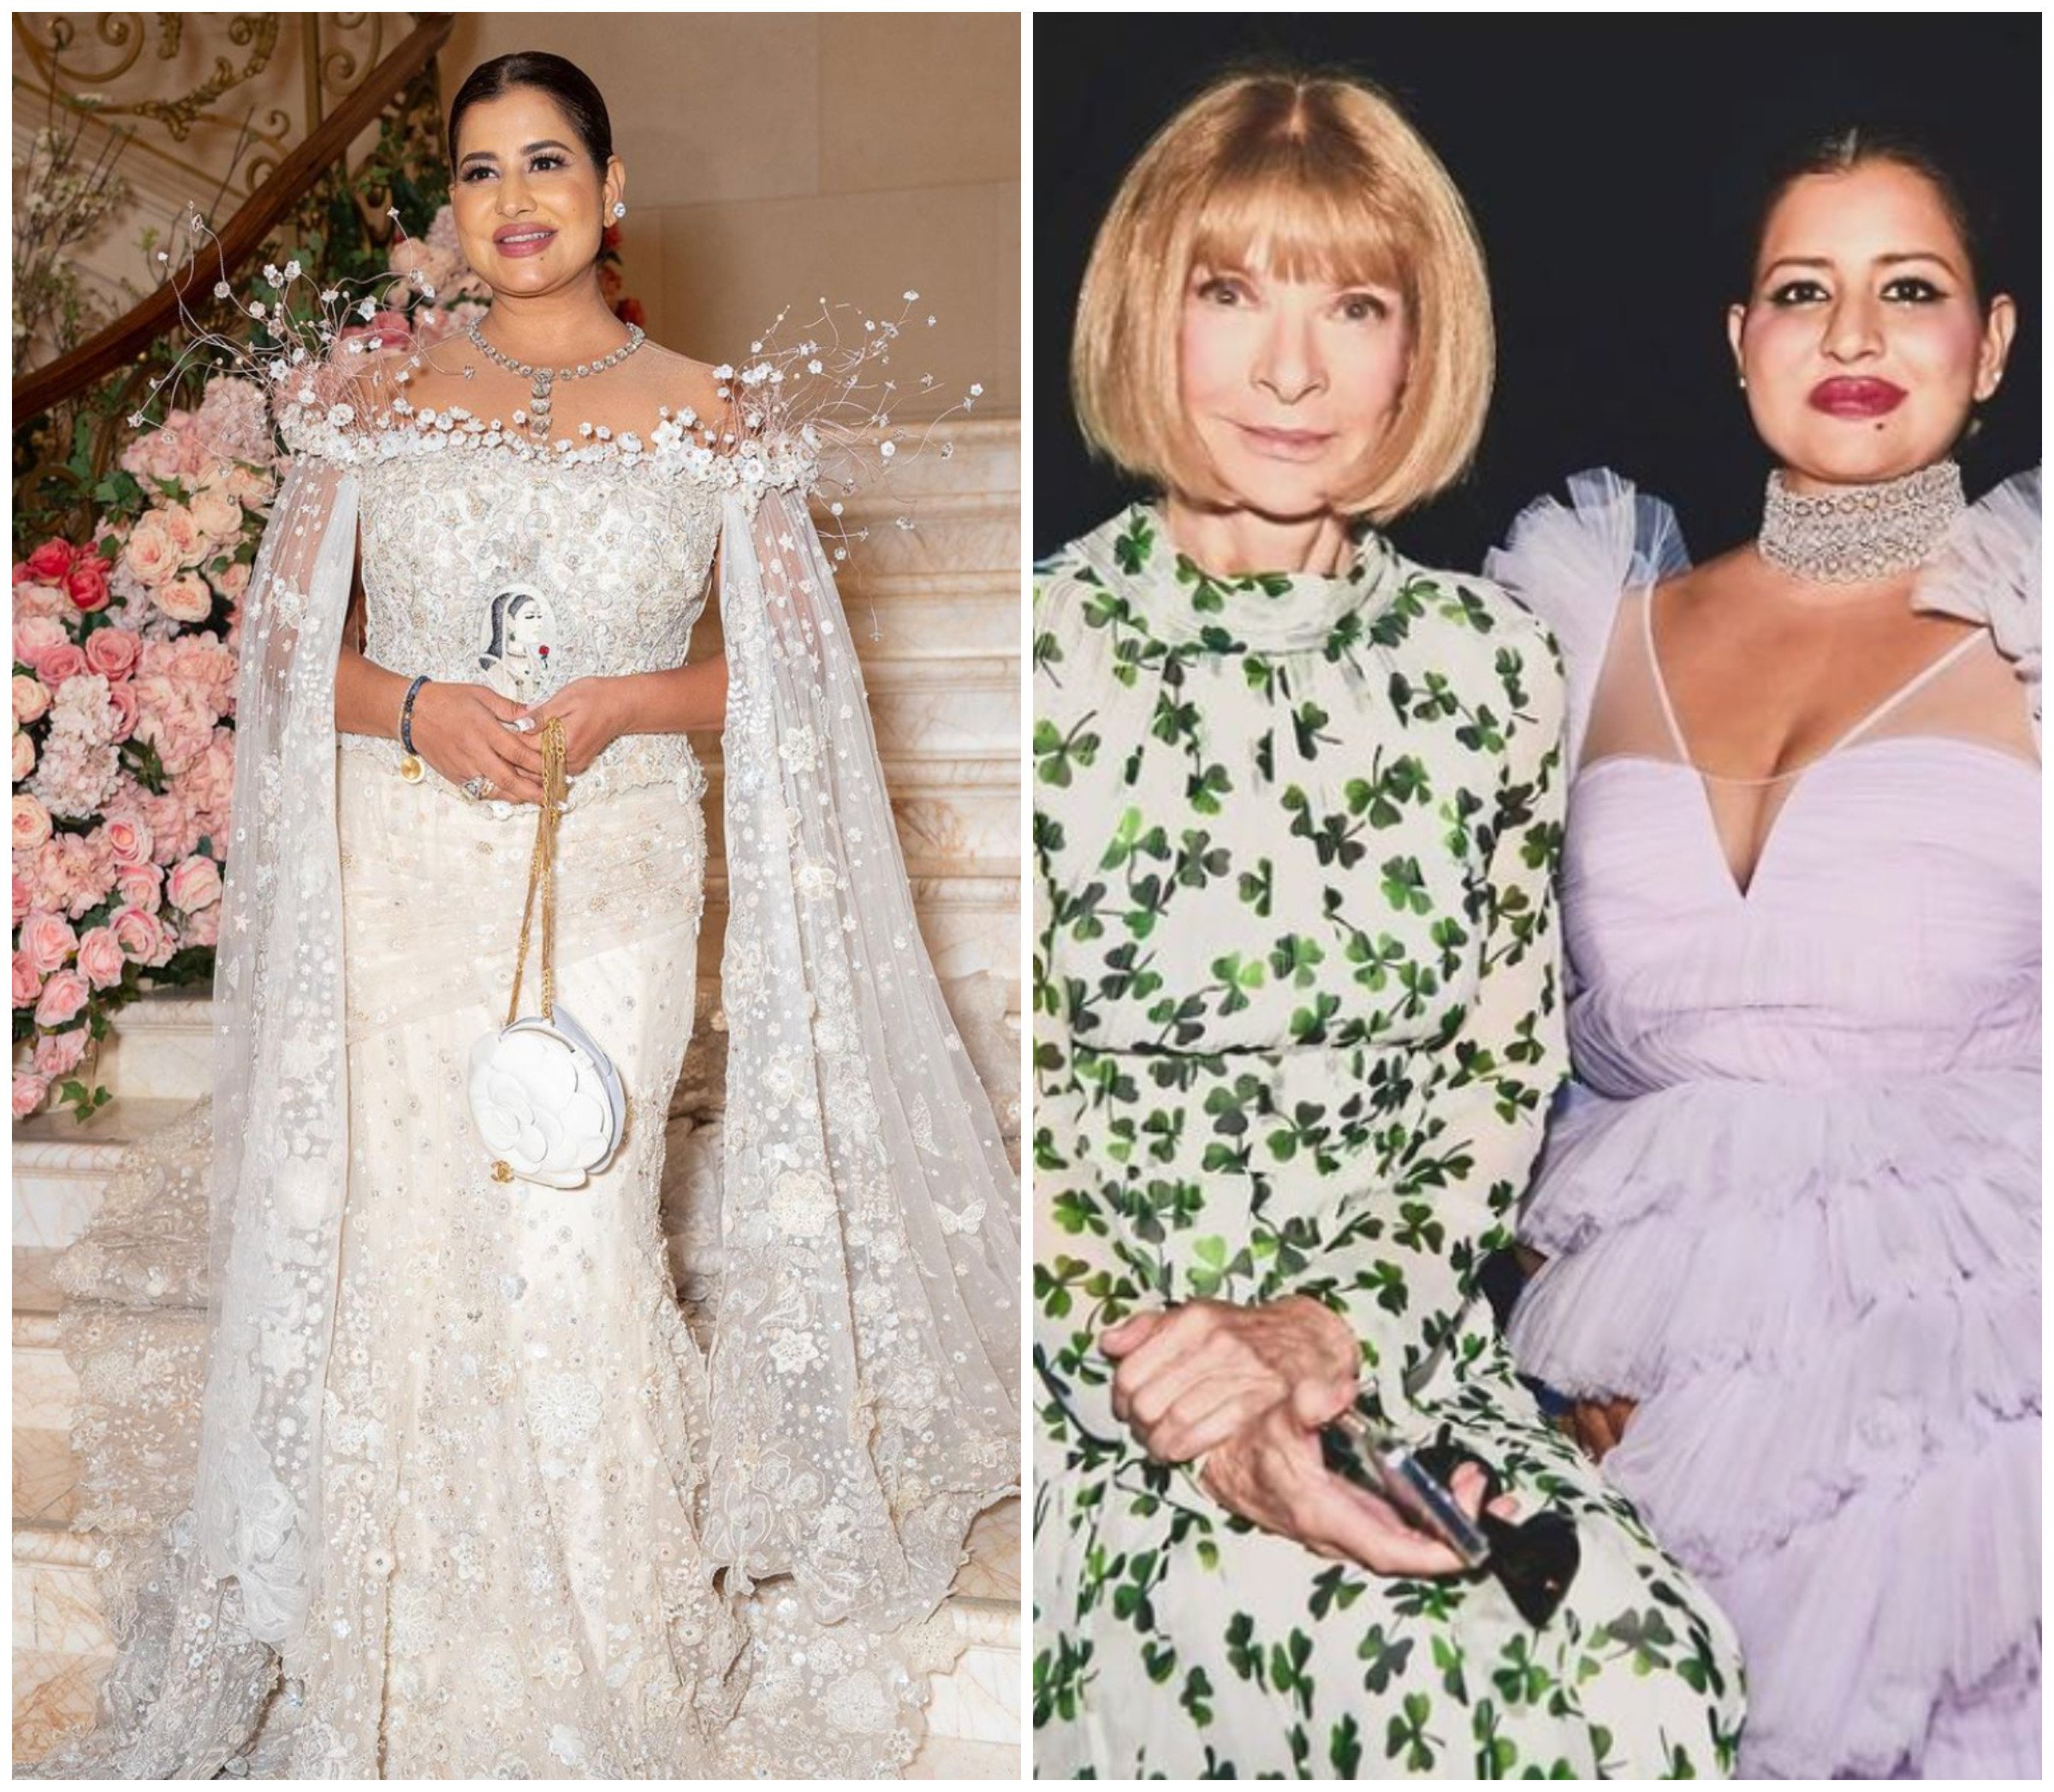 Sudha Reddy reportedly wore 200 carats worth of diamonds to the Met Gala 2024; Reddy posing with Anna Wintour. Photos: @sudhareddy.official/Instagram